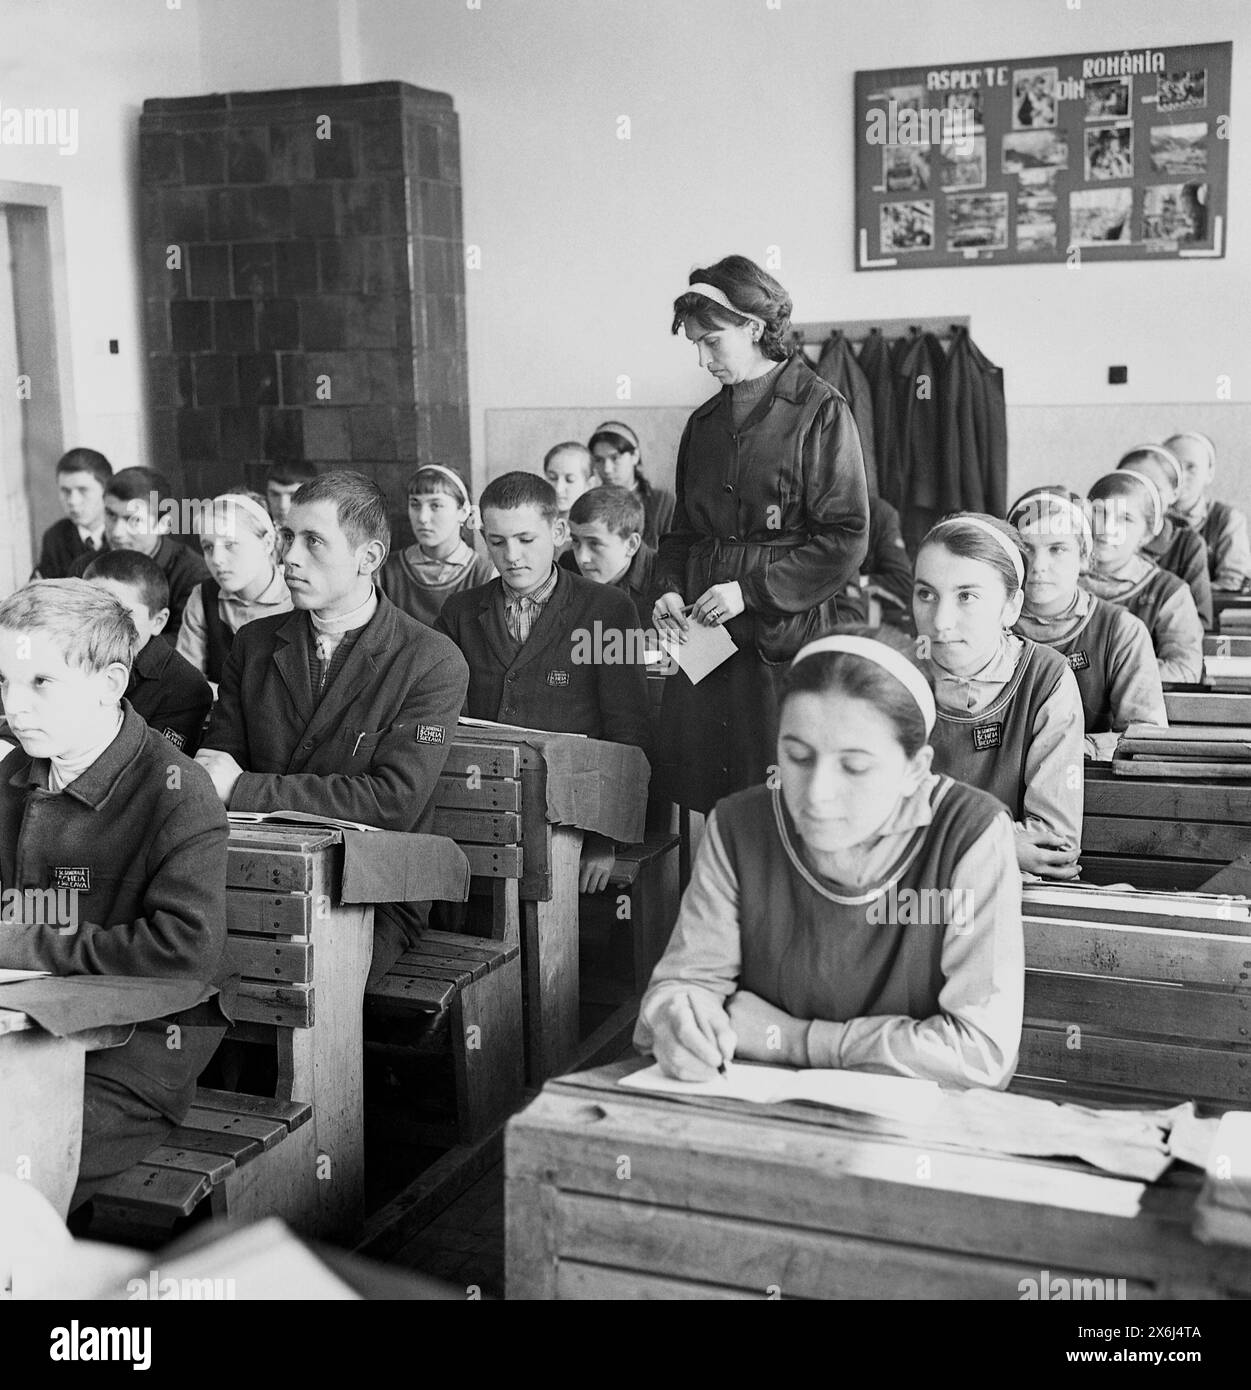 Șcheia, Suceava County, Socialist Republic of Romania  in the 1970s. 'Pioneers', students in middle school wearing the standardized communist uniform, during a class. This rural school had simple wooden furniture and a large terracotta wood stove for heating. Stock Photo